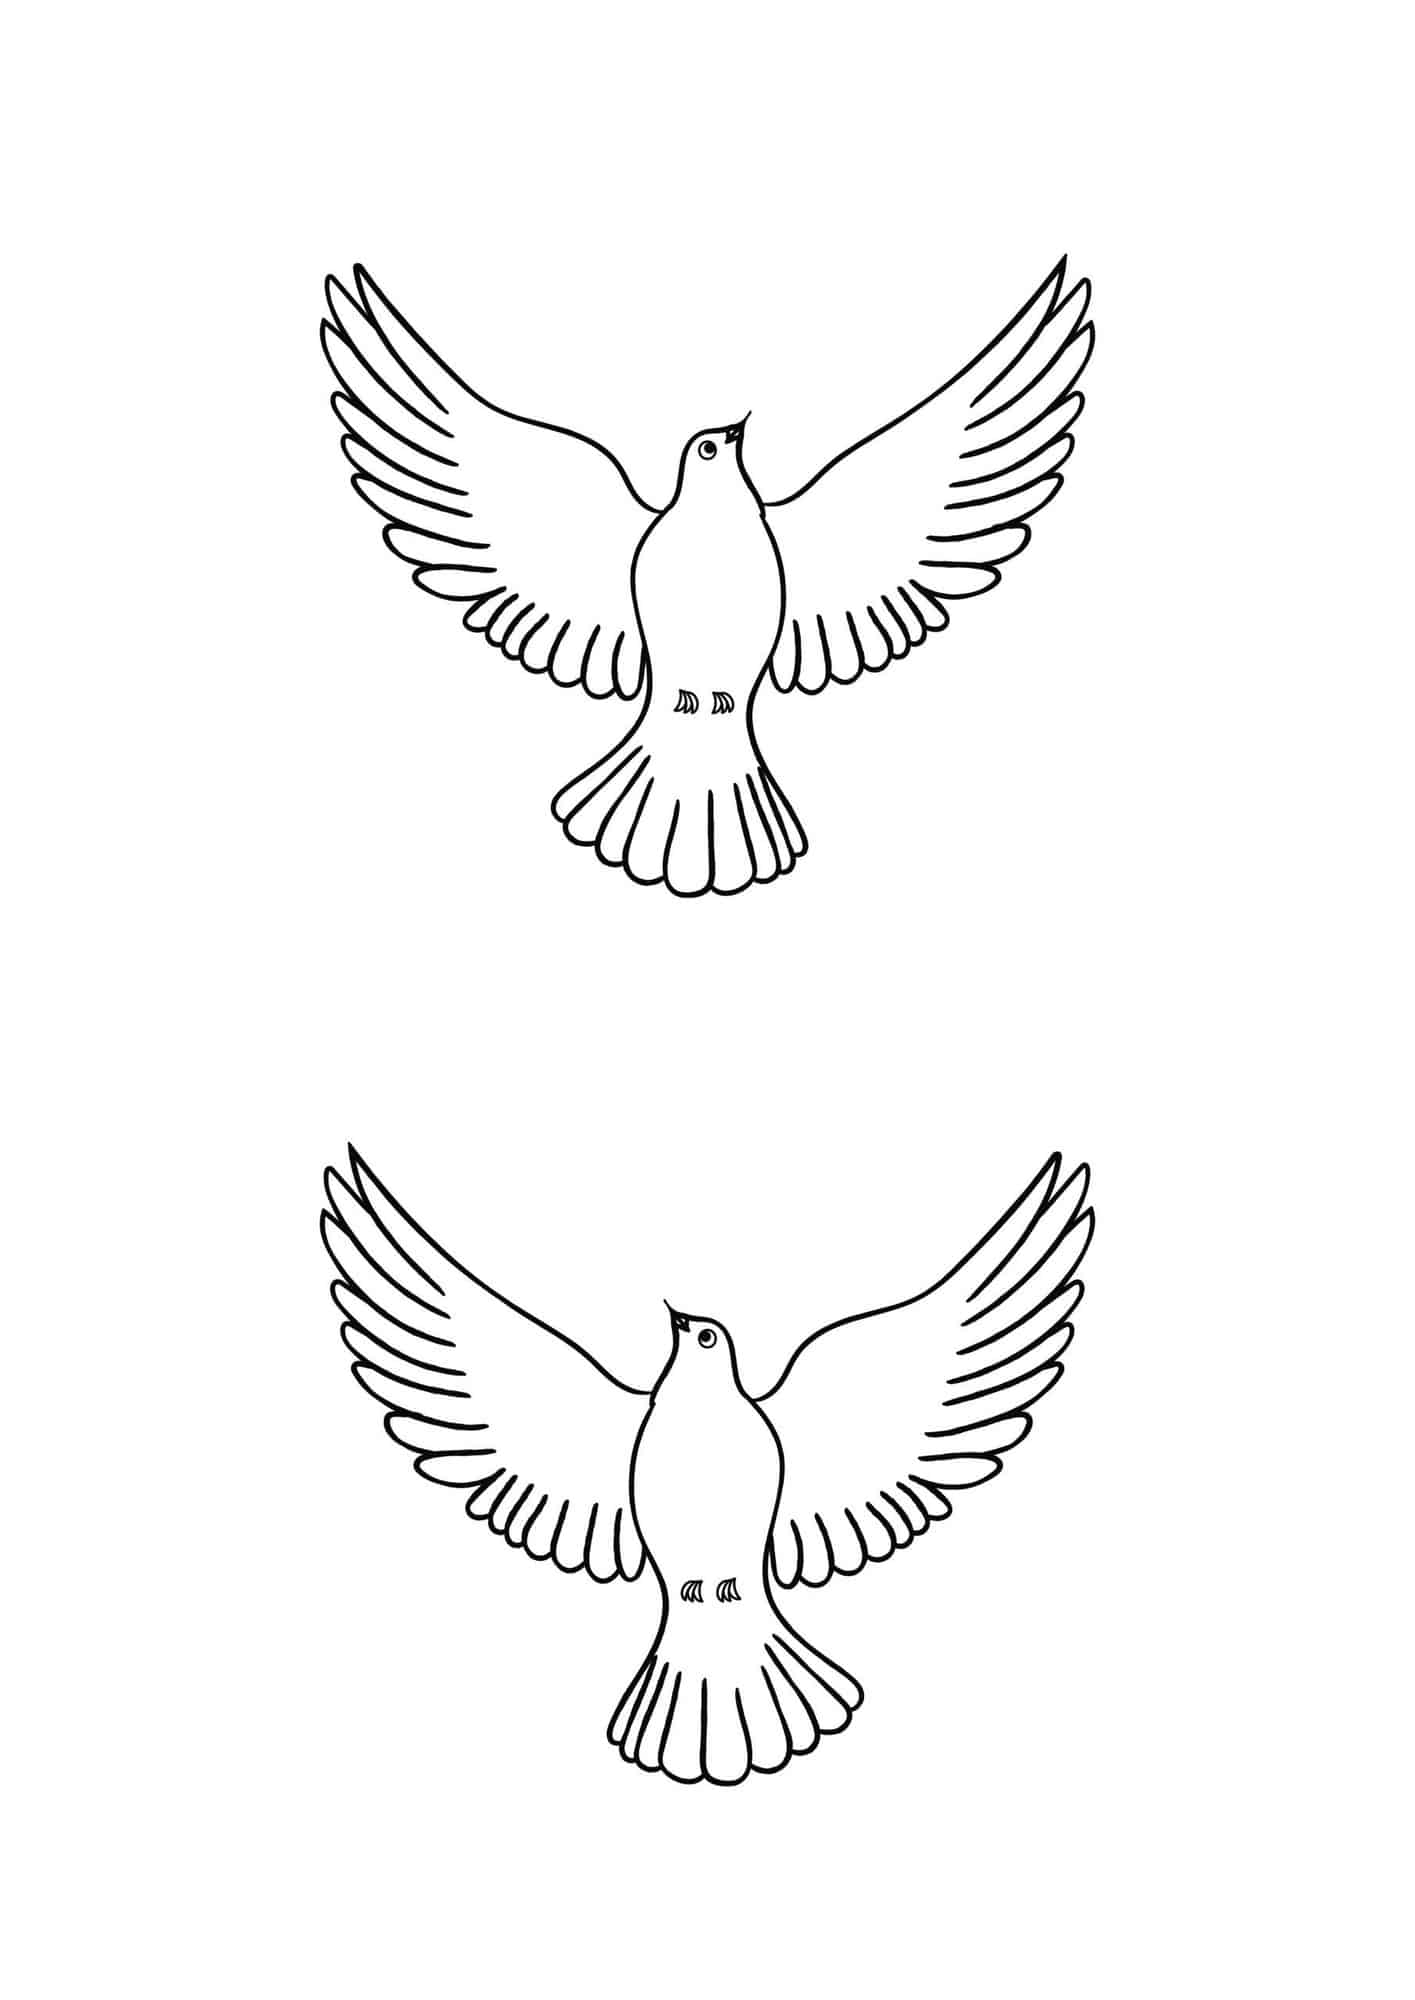 A template of 2 doves with wings wide open.